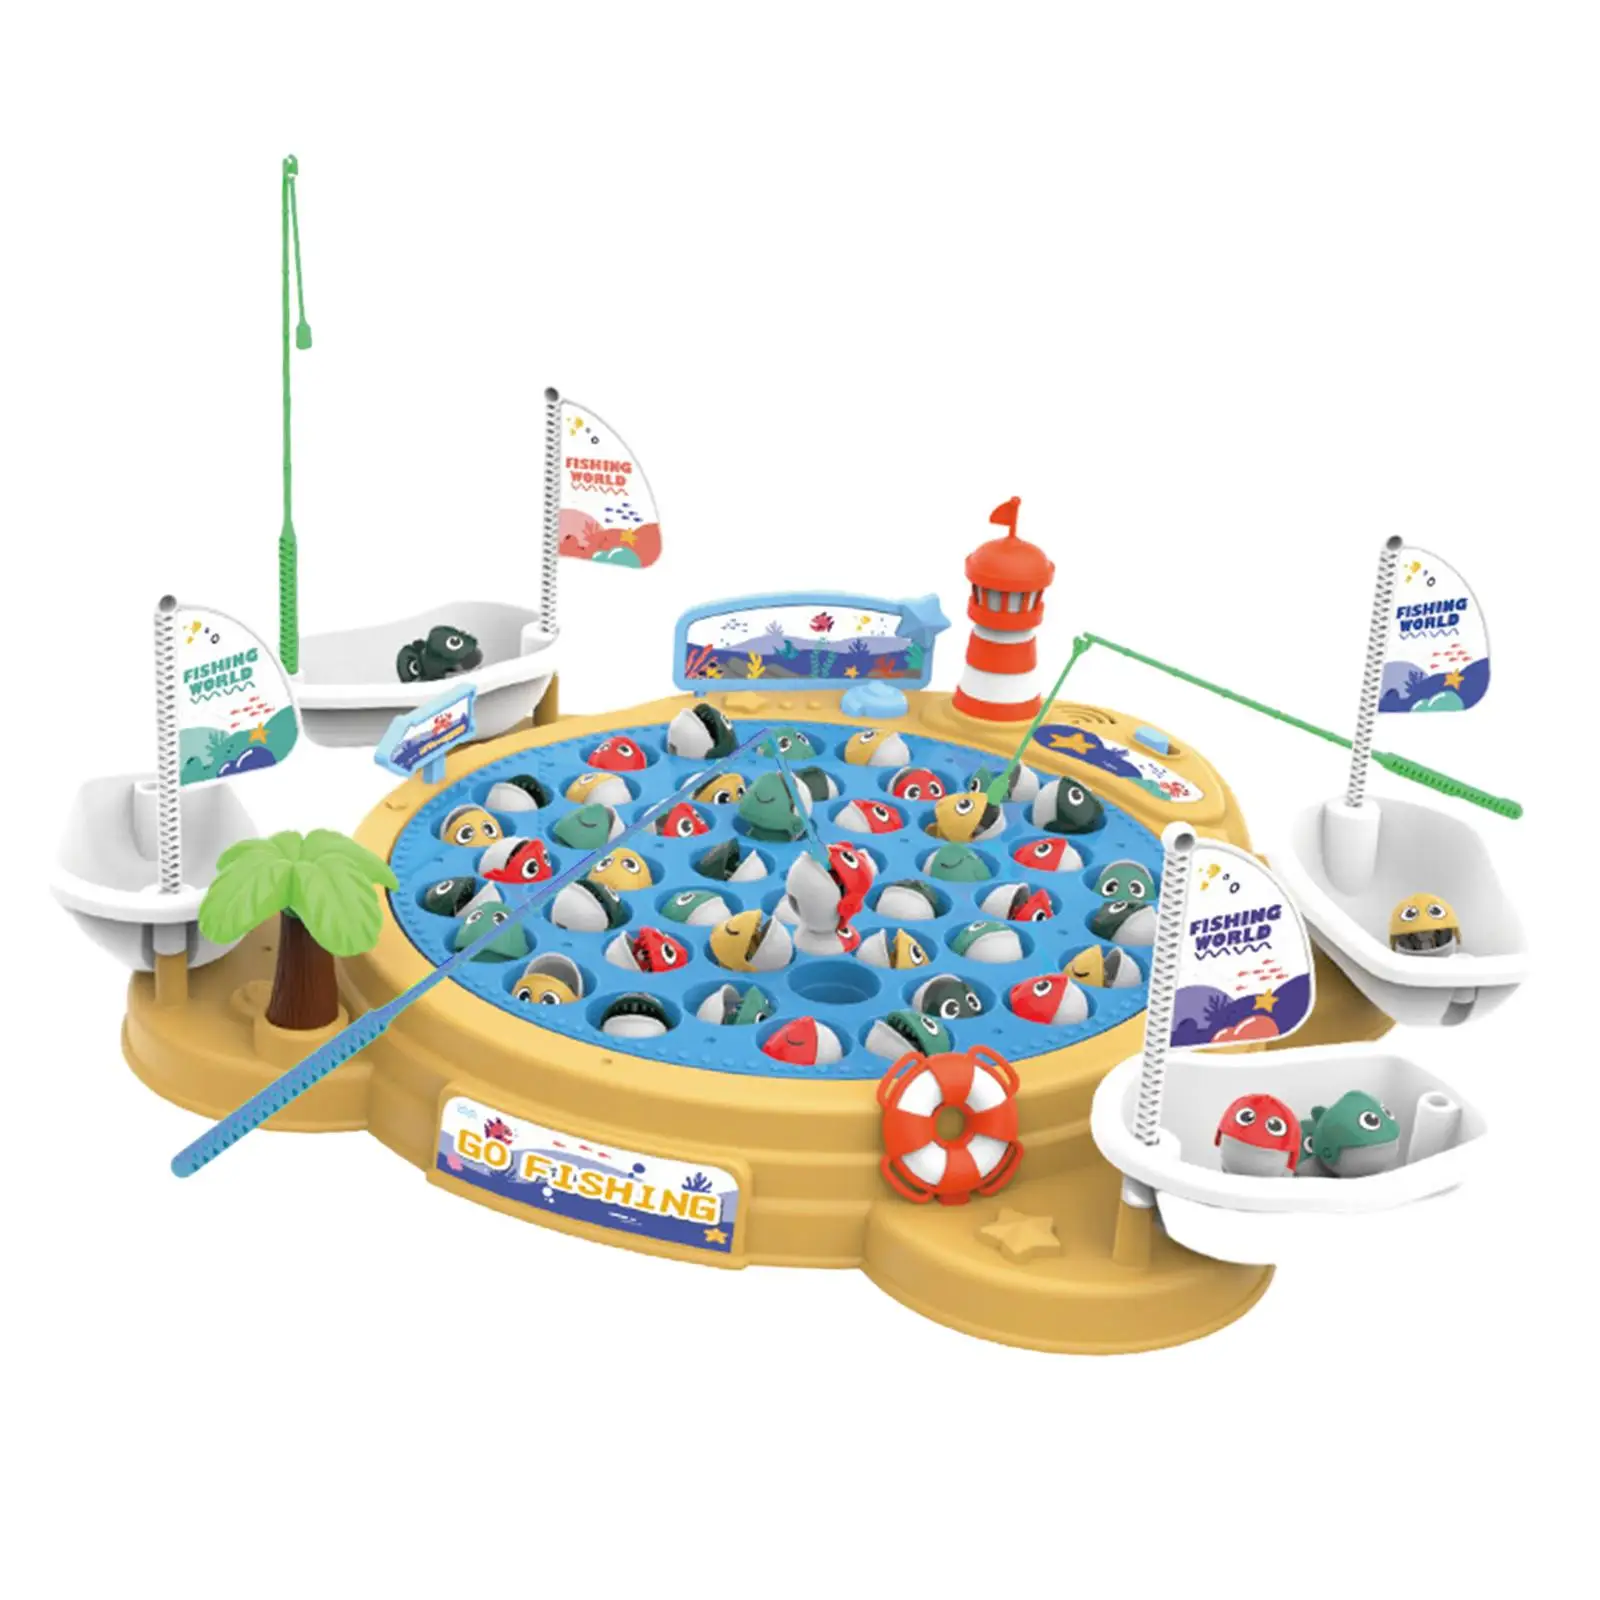 Fishing Game Play Set Developmental Toy Fine Motor Skill Teaching Aid Fishing Game Toy for Boys Children Toddlers Holiday Gifts